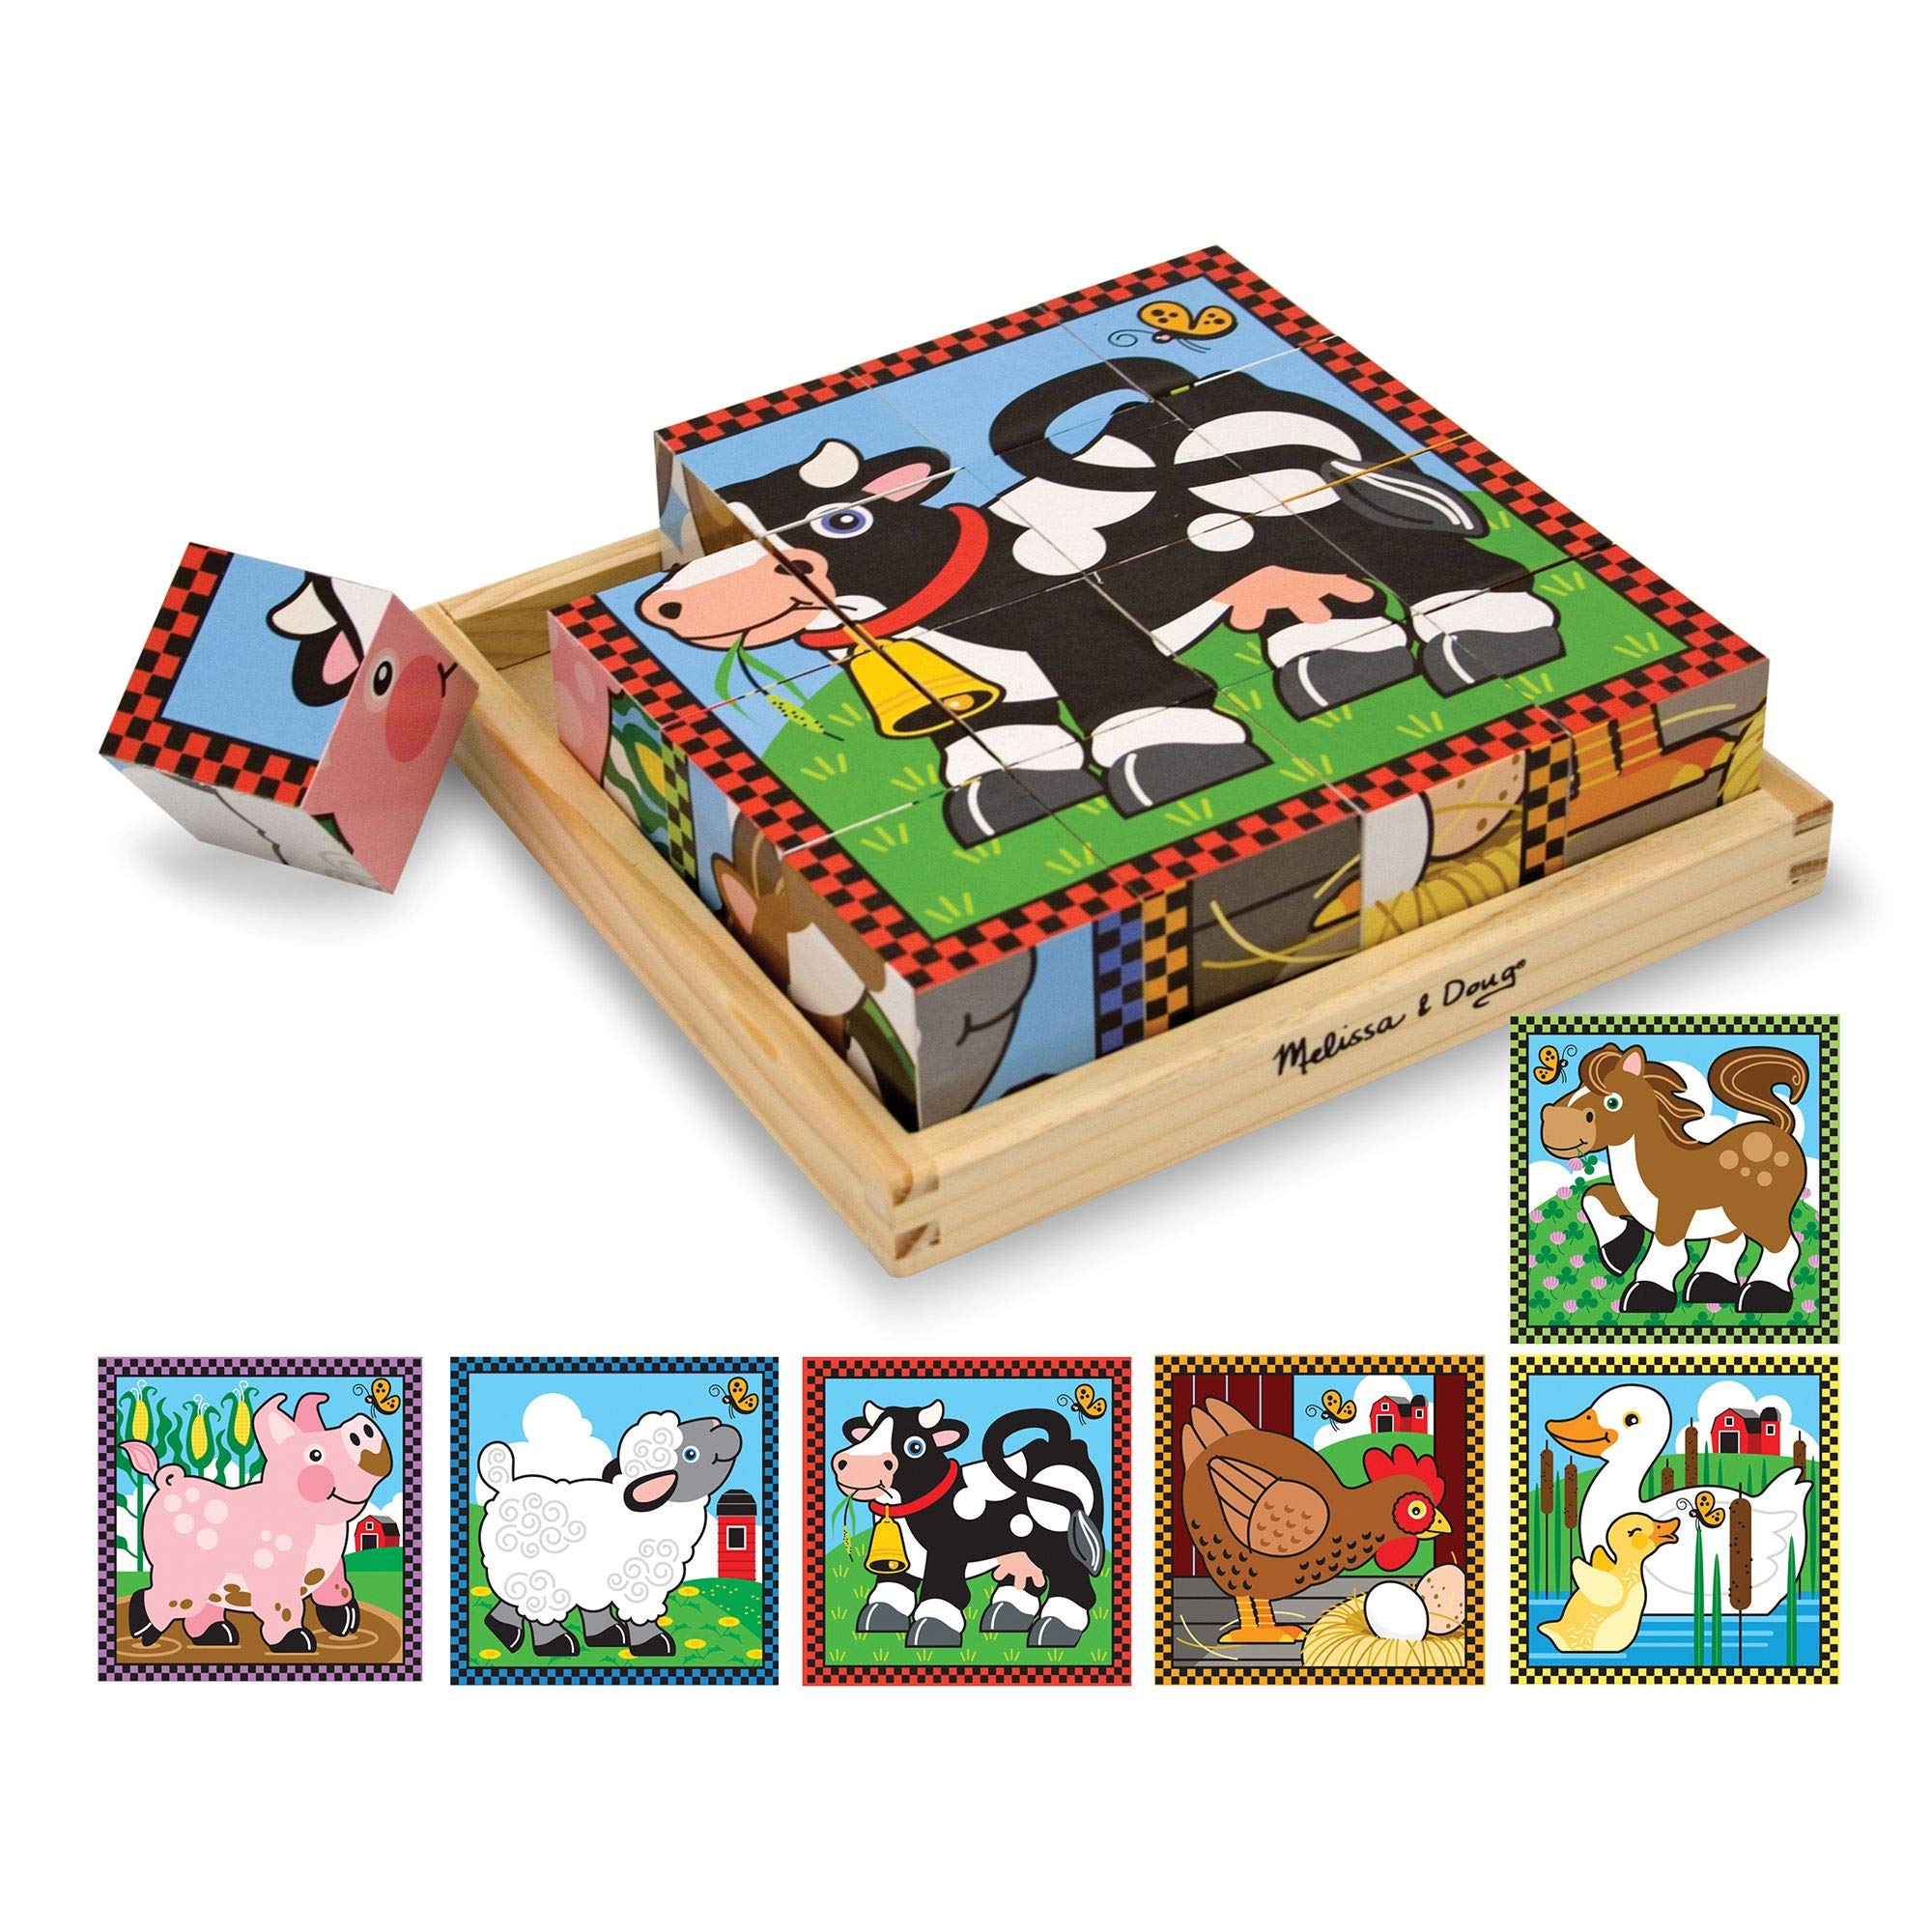 Melissa & Doug Farm Wooden Cube Puzzle With Storage Tray - 6 Puzzles in 1 (16 pcs) - Toddler Animal Puzzle -FSC-Certified Materials